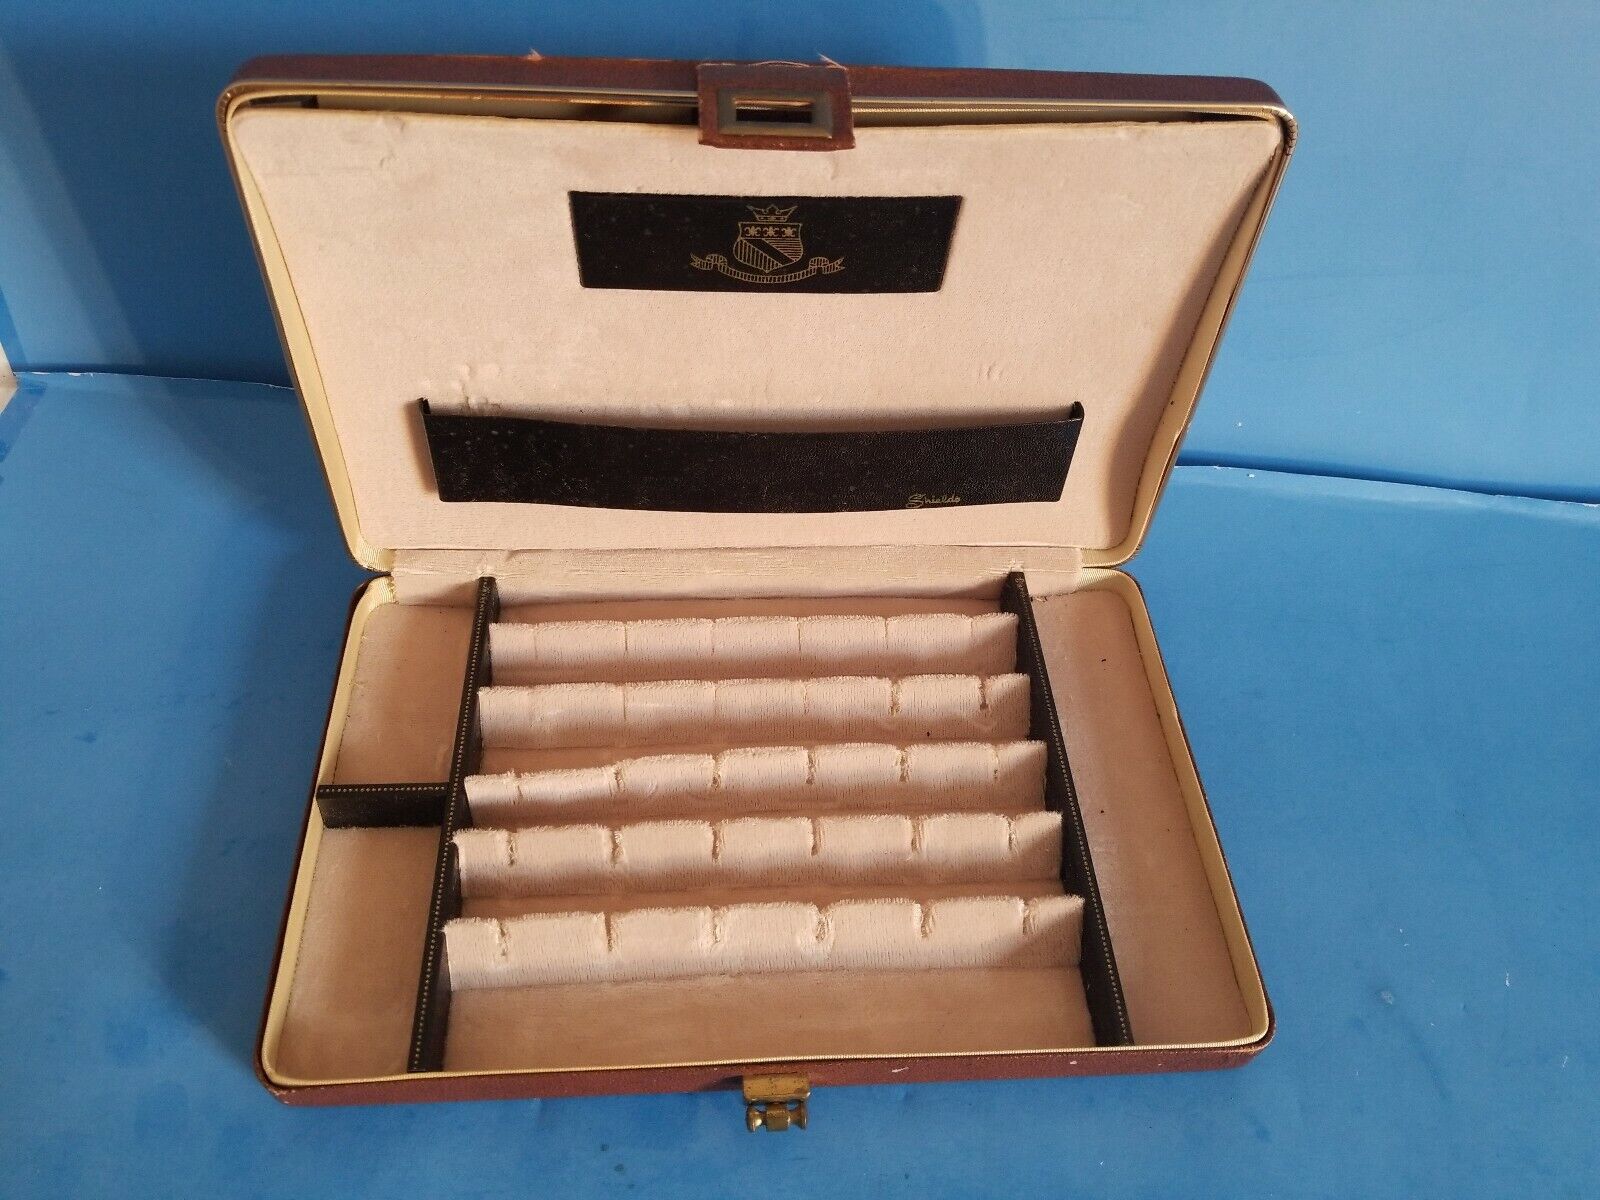 VINTAGE SHIELD CUFFLINKS BOX.NOT GREAT CONDITION.CHECK PHOTOS.